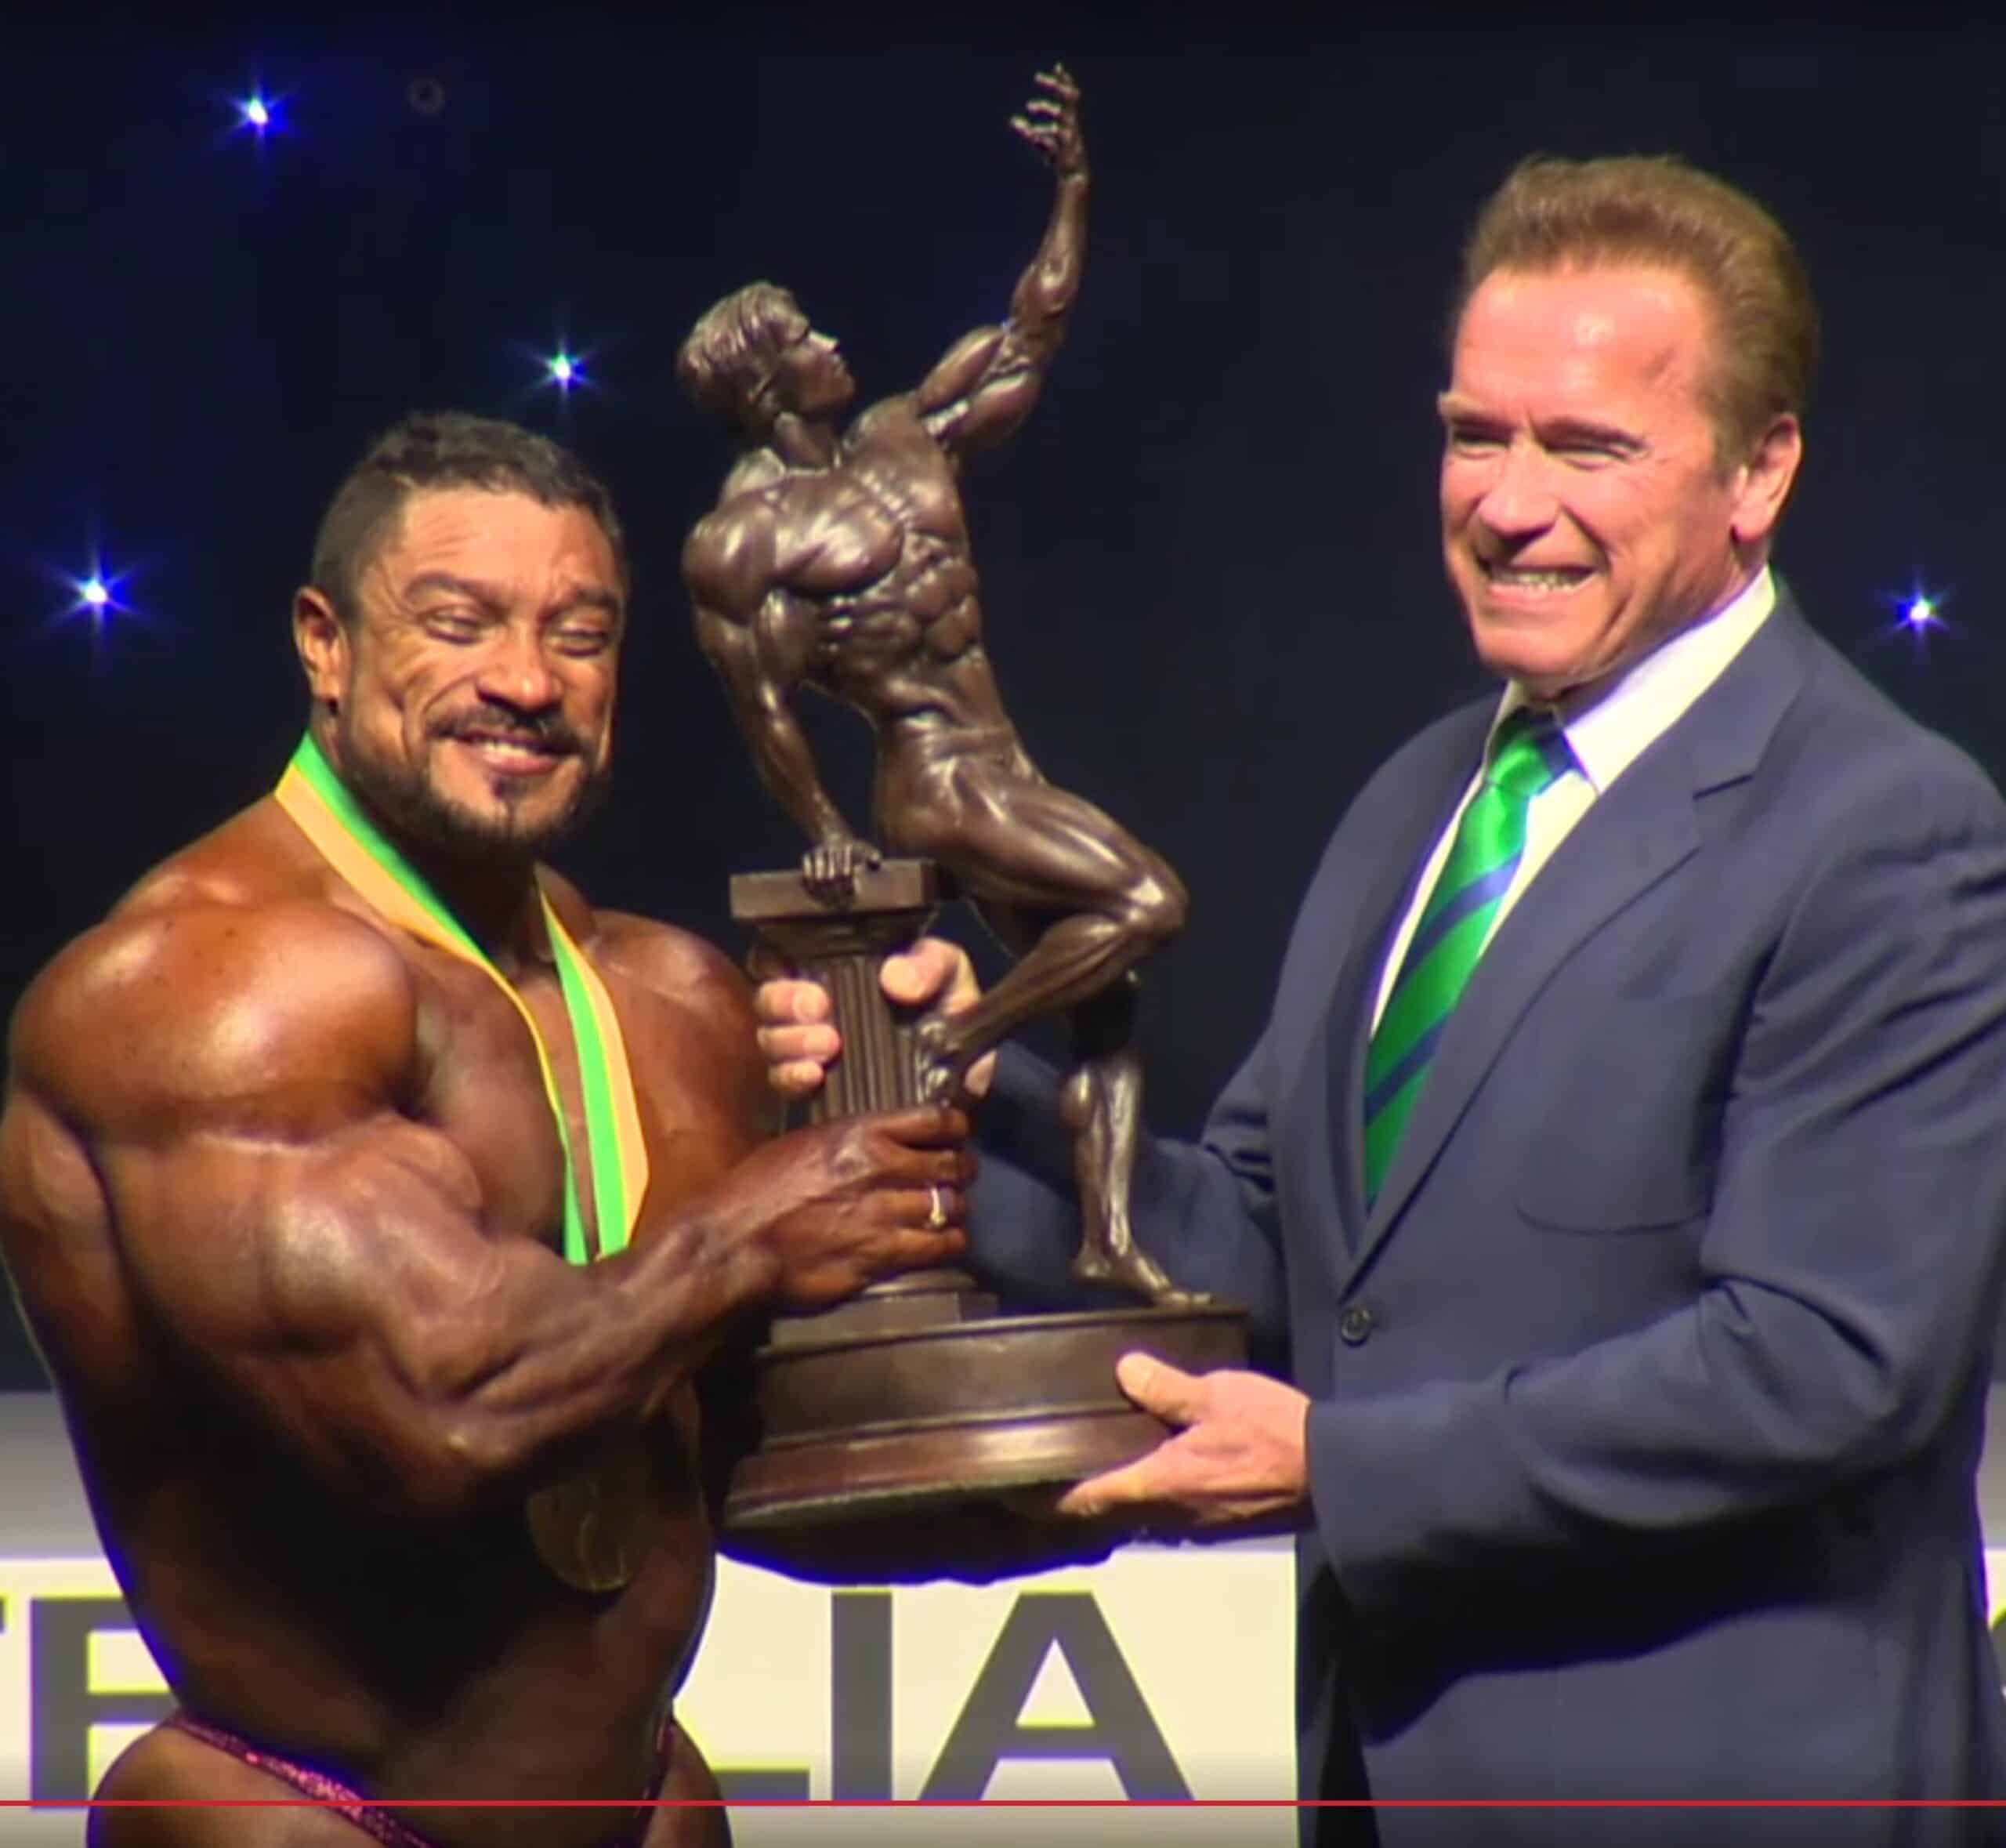 And the winner of the 2018 Arnold Classic Australia  is…